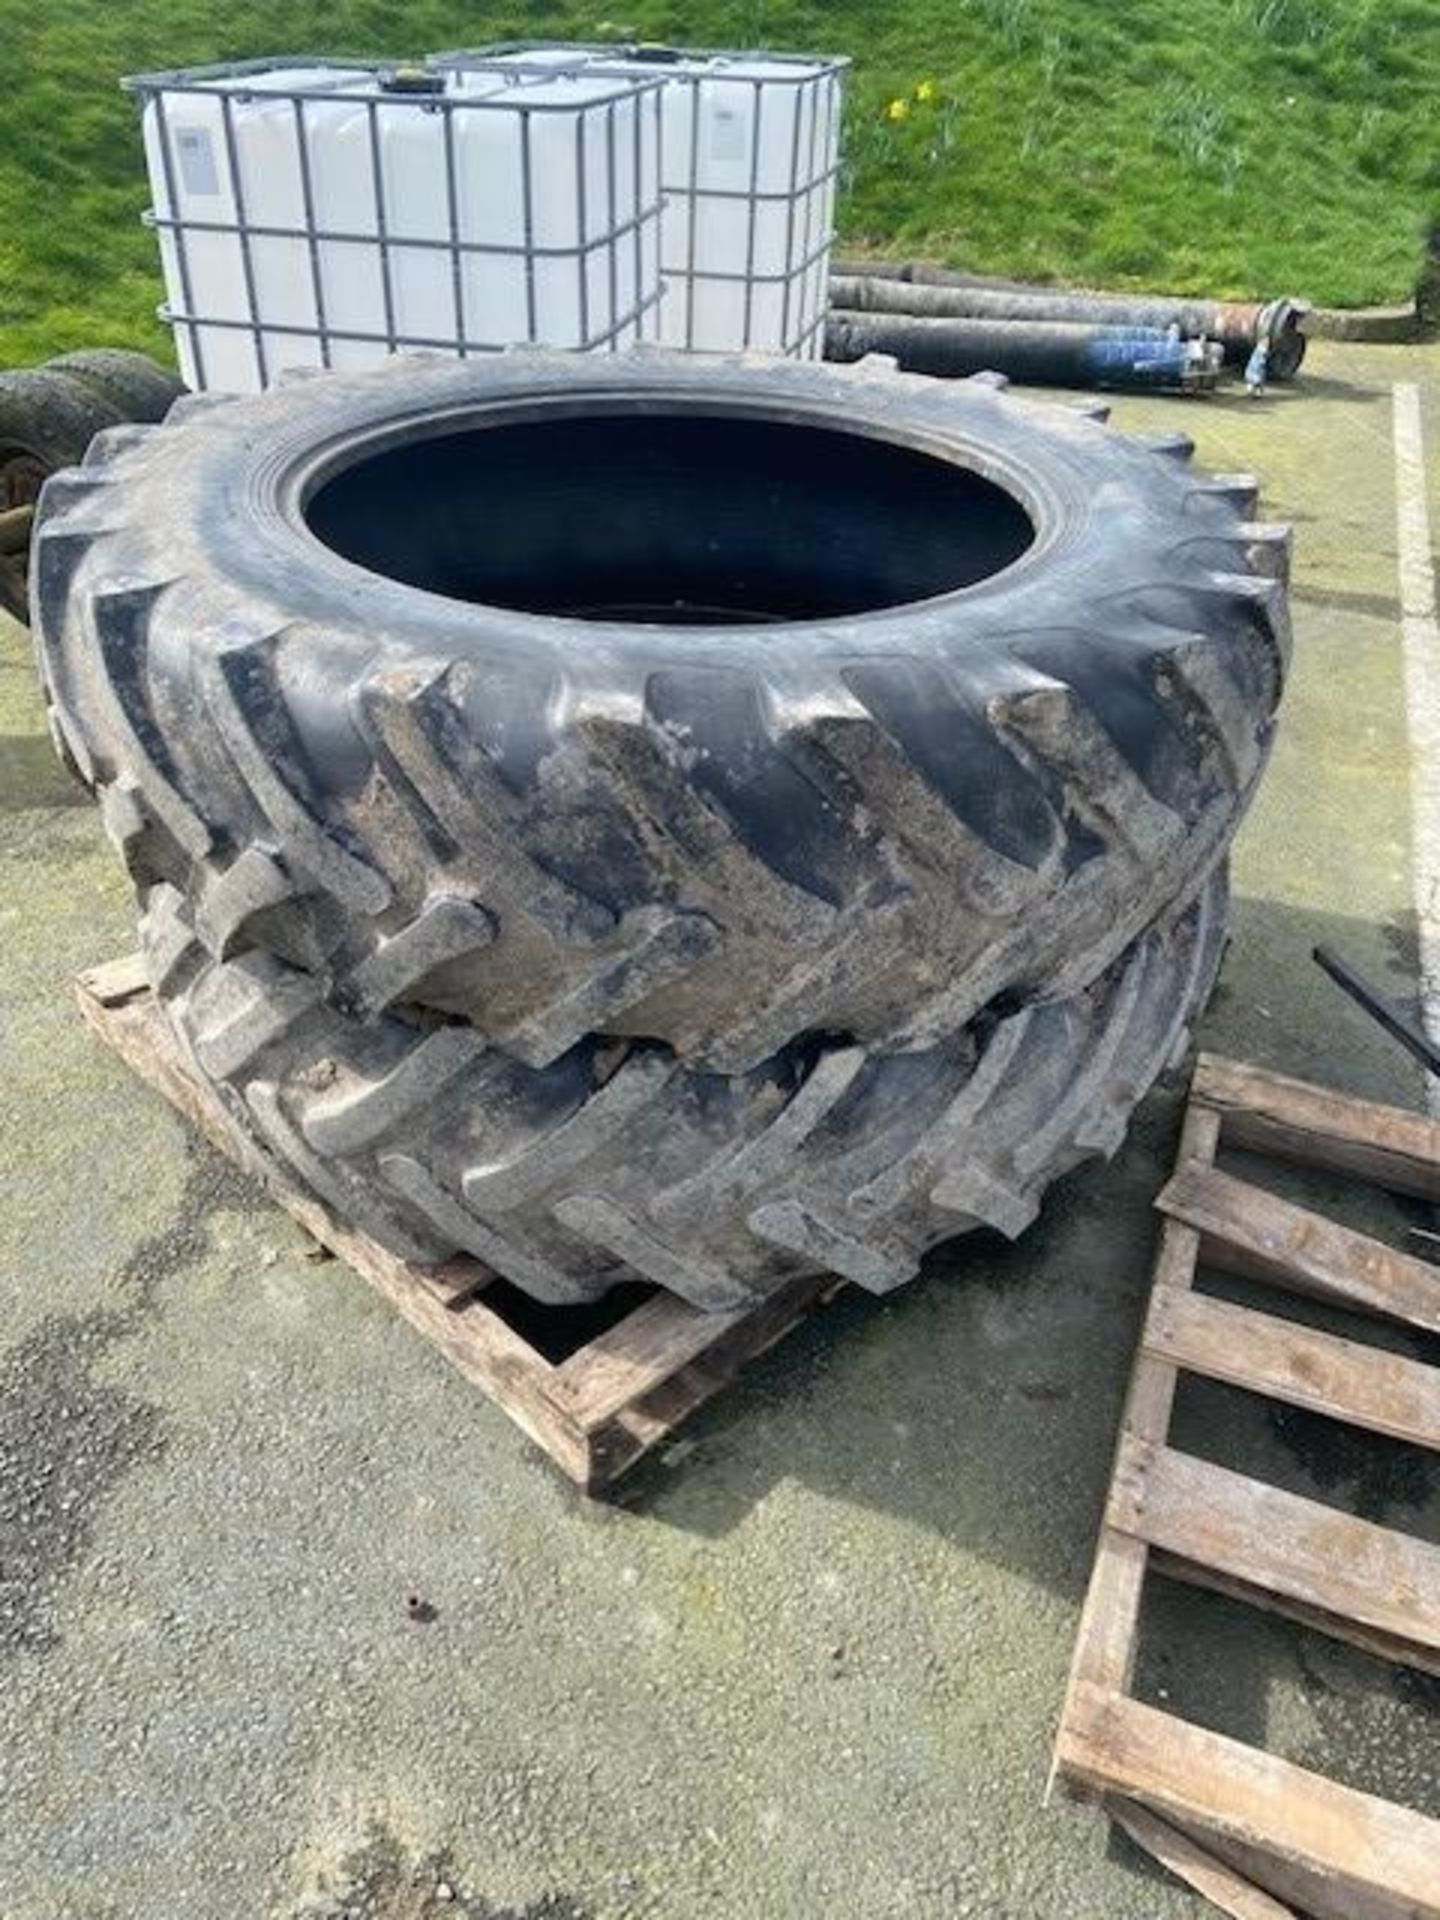 SET OF USED TRACTOR TYRES. 16.9 R38